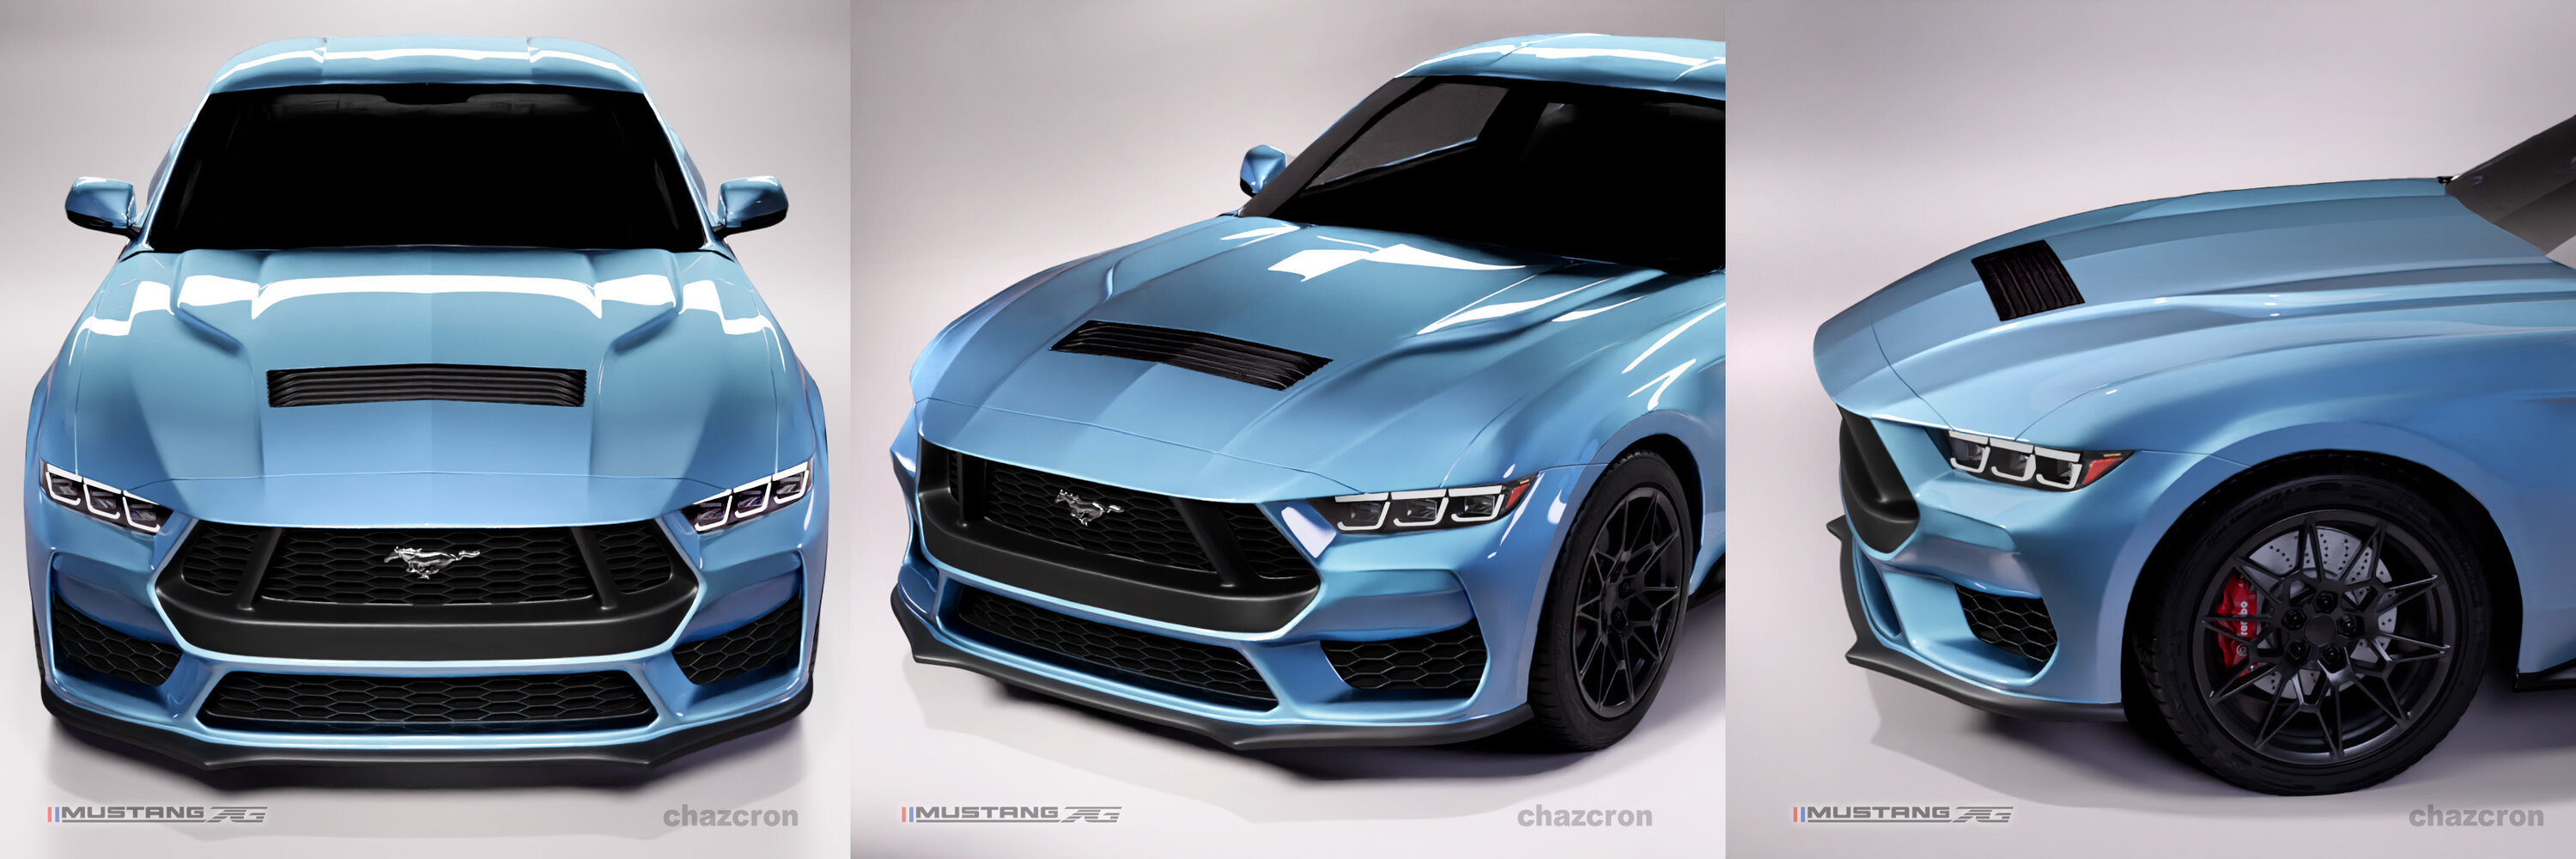 S650 Mustang chazcron weighs in... 7th gen 2023 Mustang S650 3D model & renderings in several colors! Tryptic